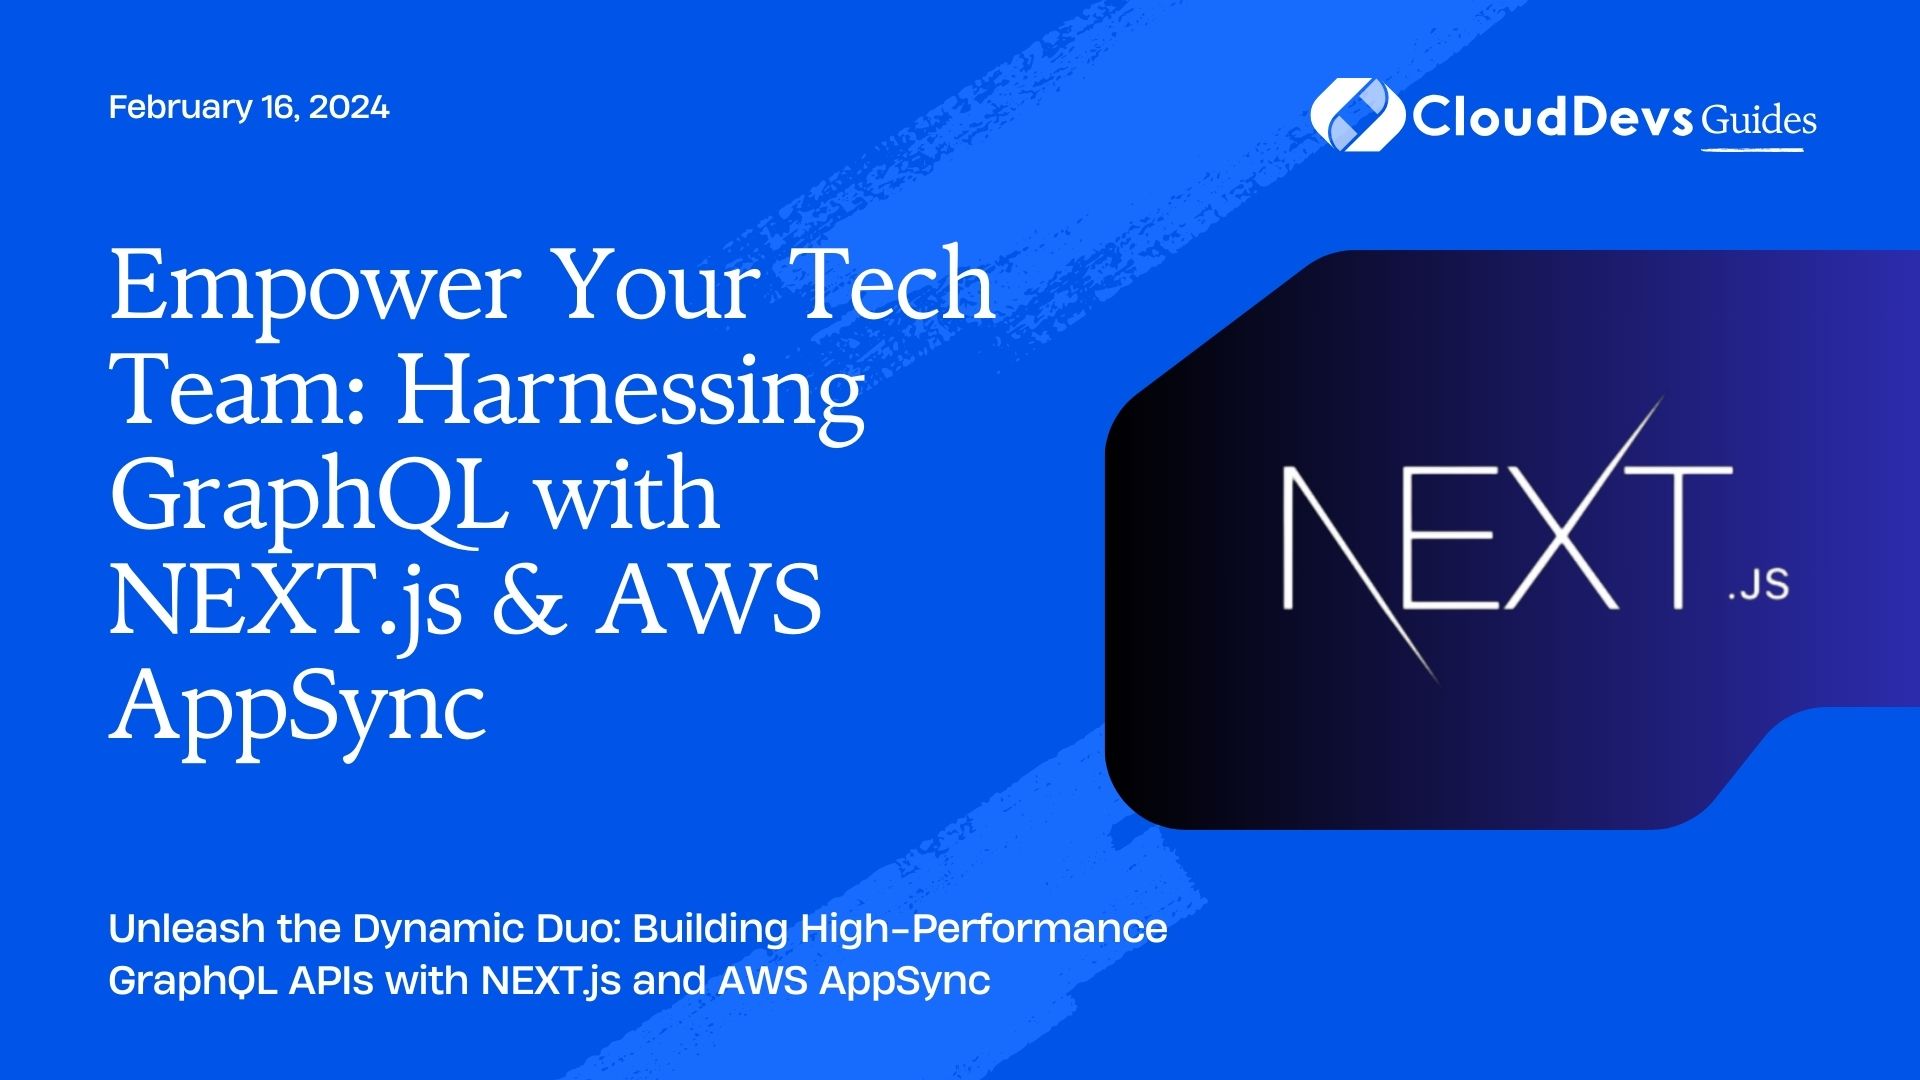 Empower Your Tech Team: Harnessing GraphQL with NEXT.js & AWS AppSync